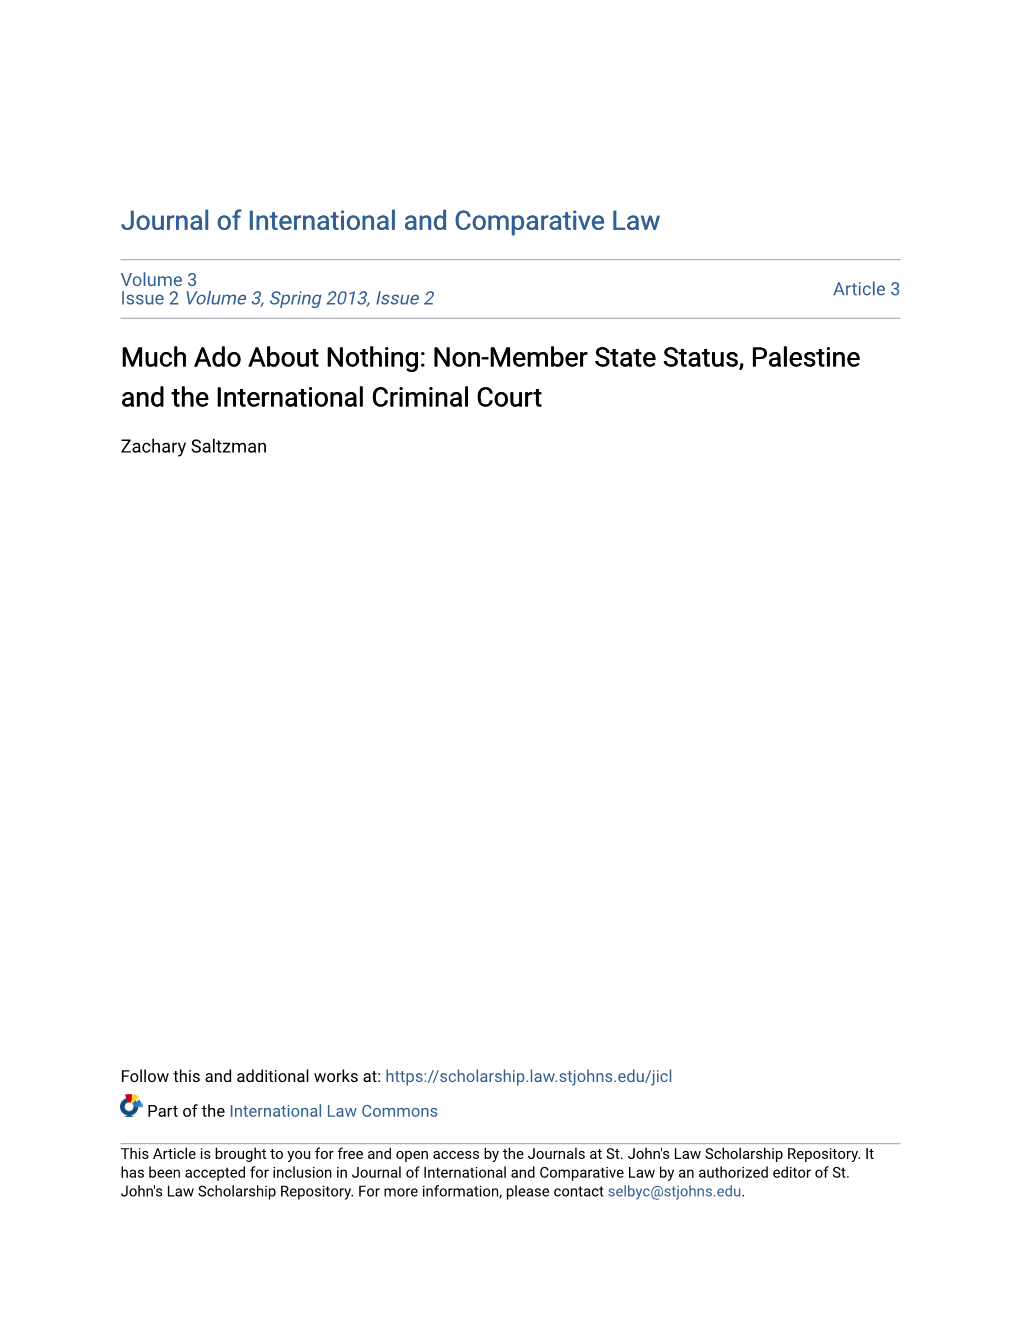 Non-Member State Status, Palestine and the International Criminal Court